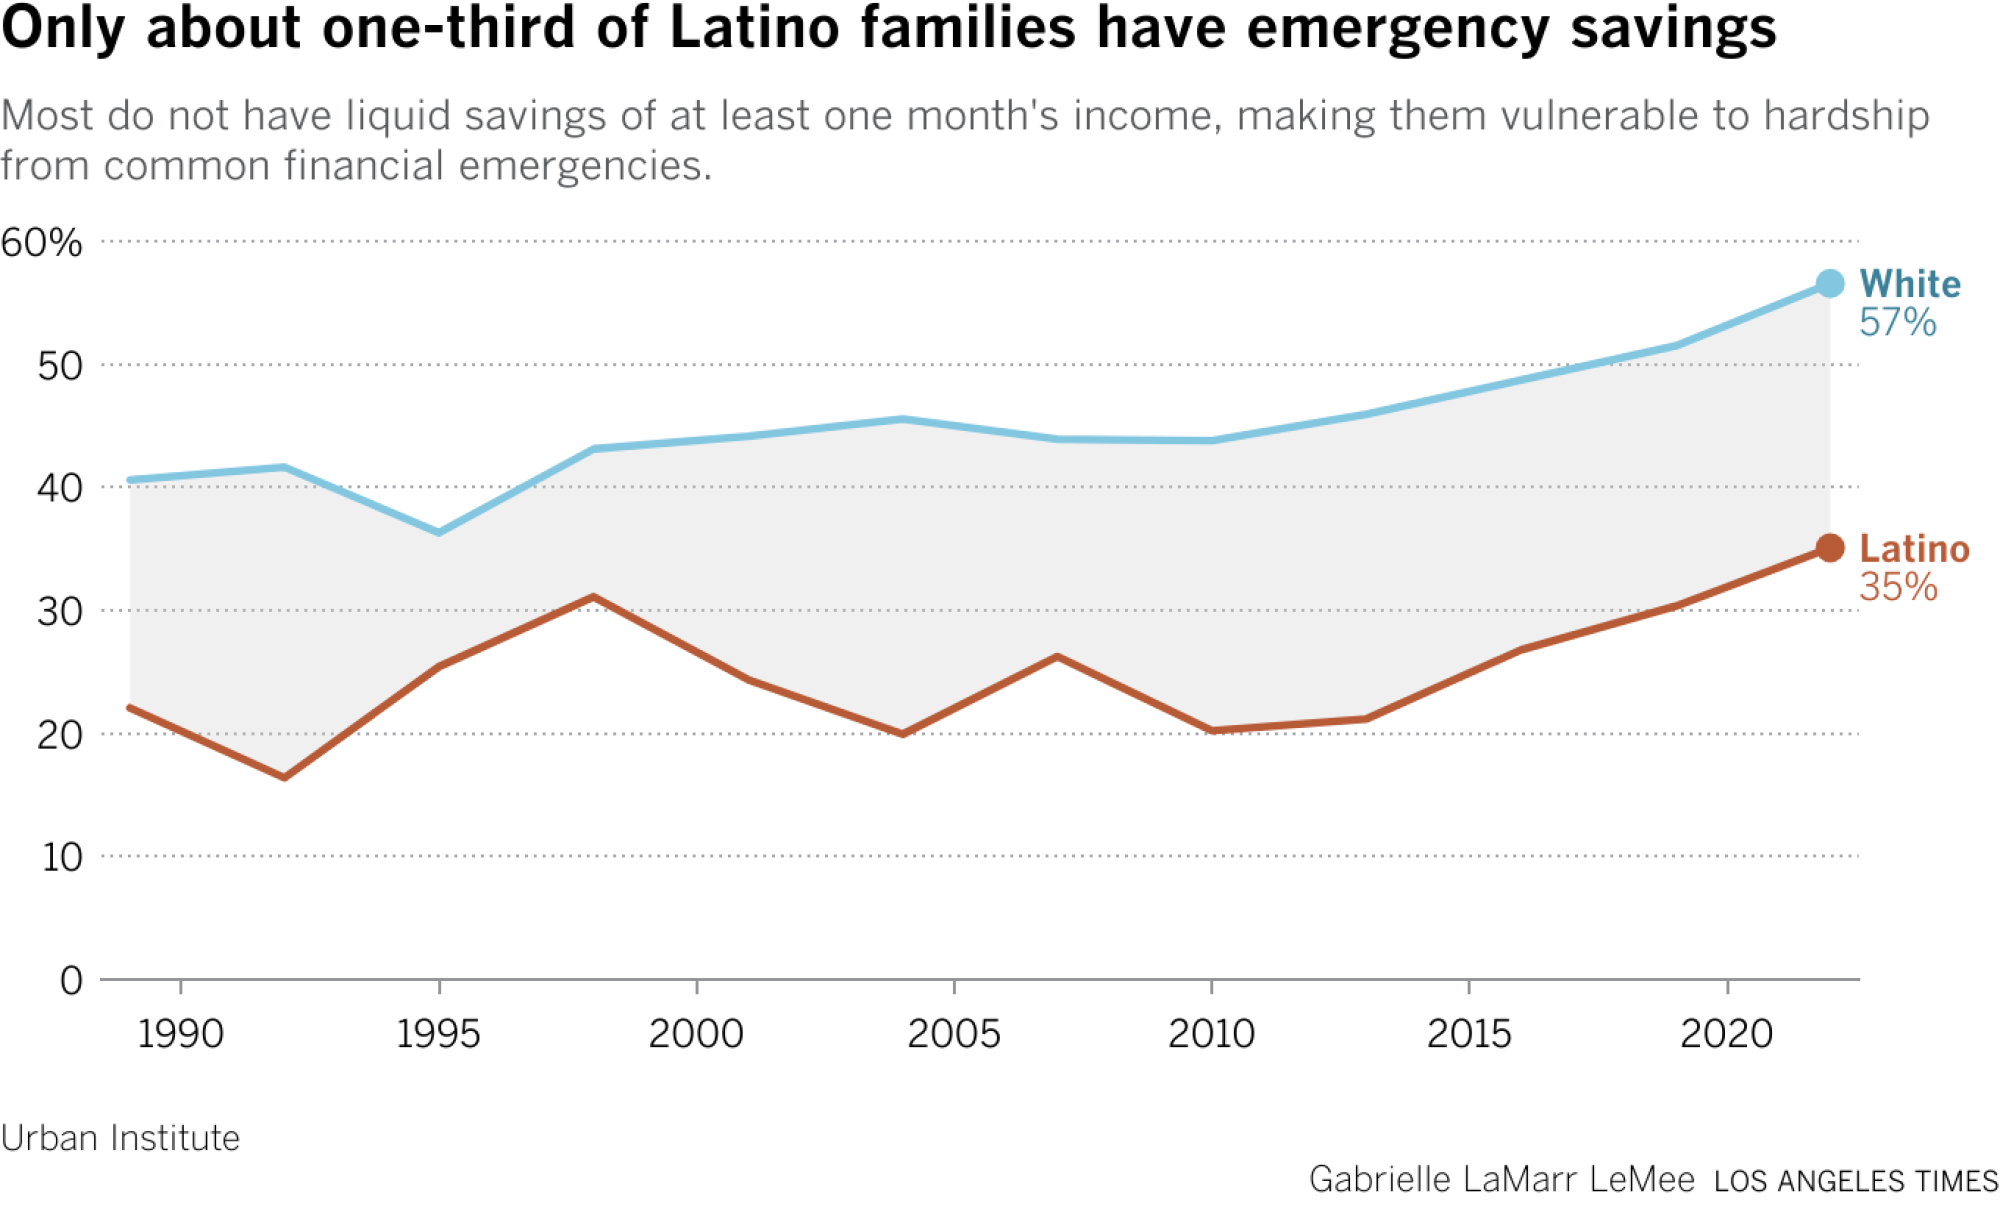 Line chart showing the share of white and Hispanic families with emergency savings of at least one month's income. In 2022, 35% of Hispanic families and 57% of white families had this level of savings.